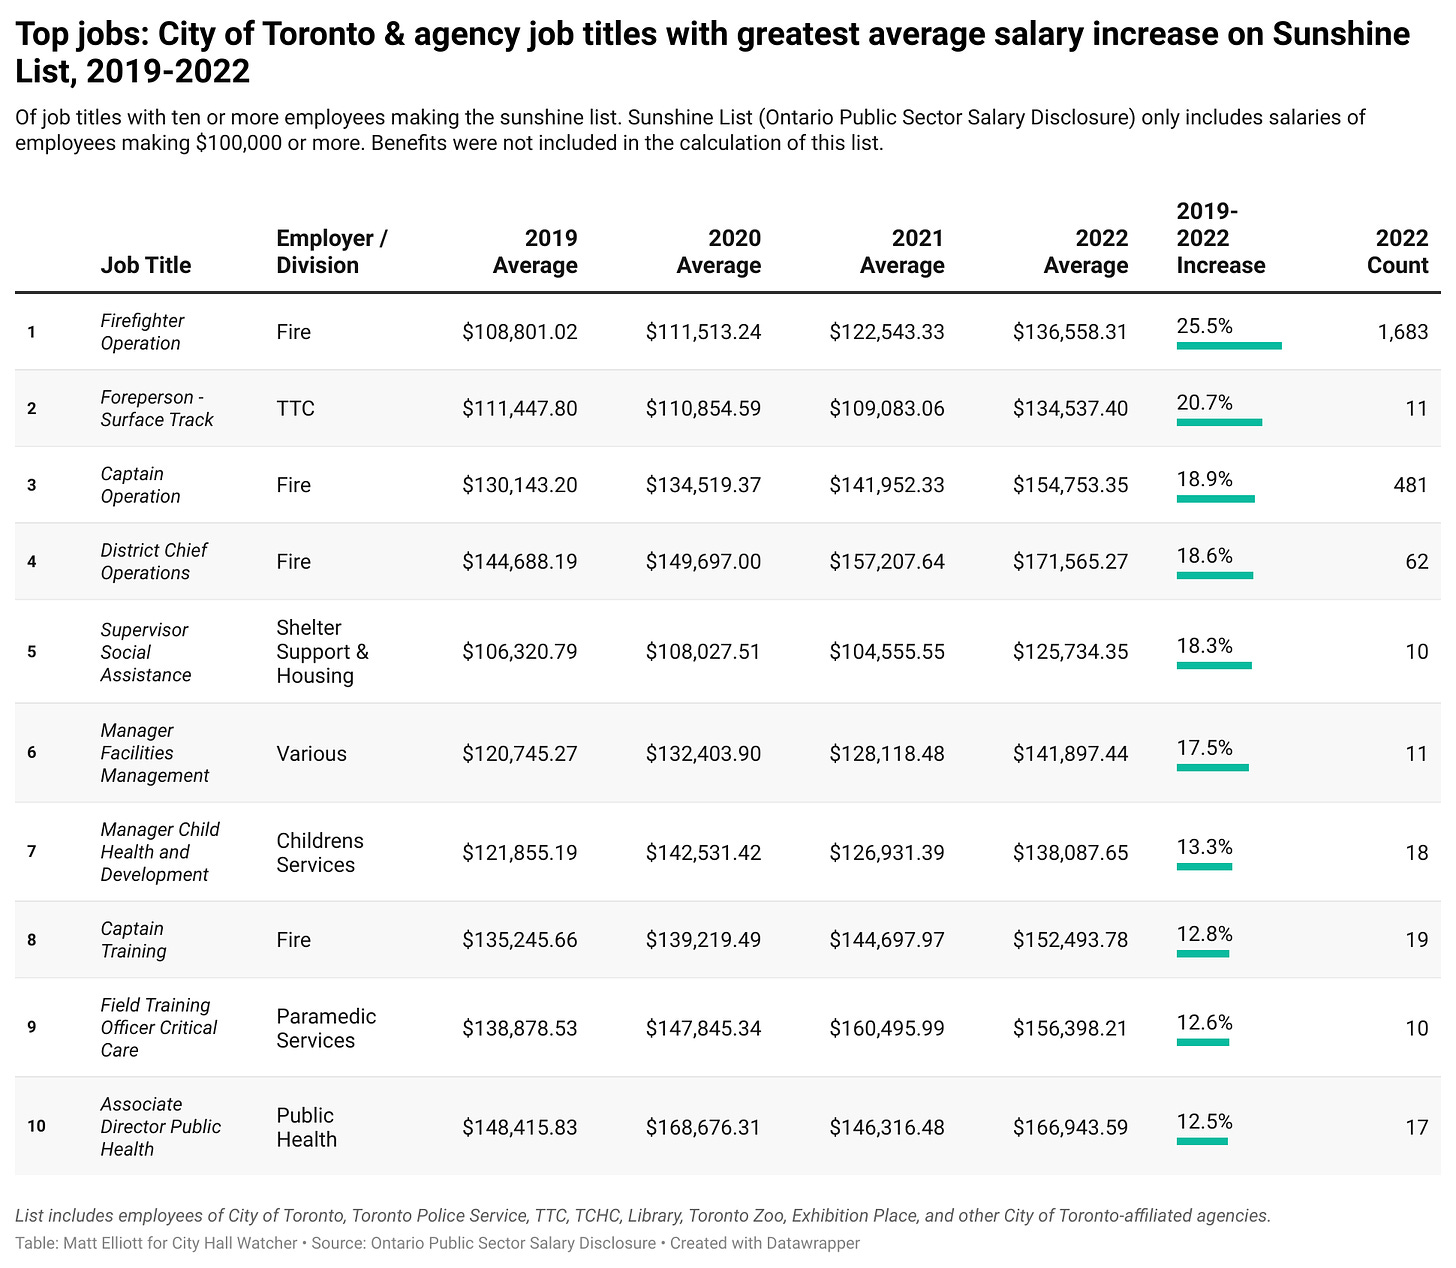 Data table showing job titles ranked by average salary increase on Sunshine List, 2019-2022